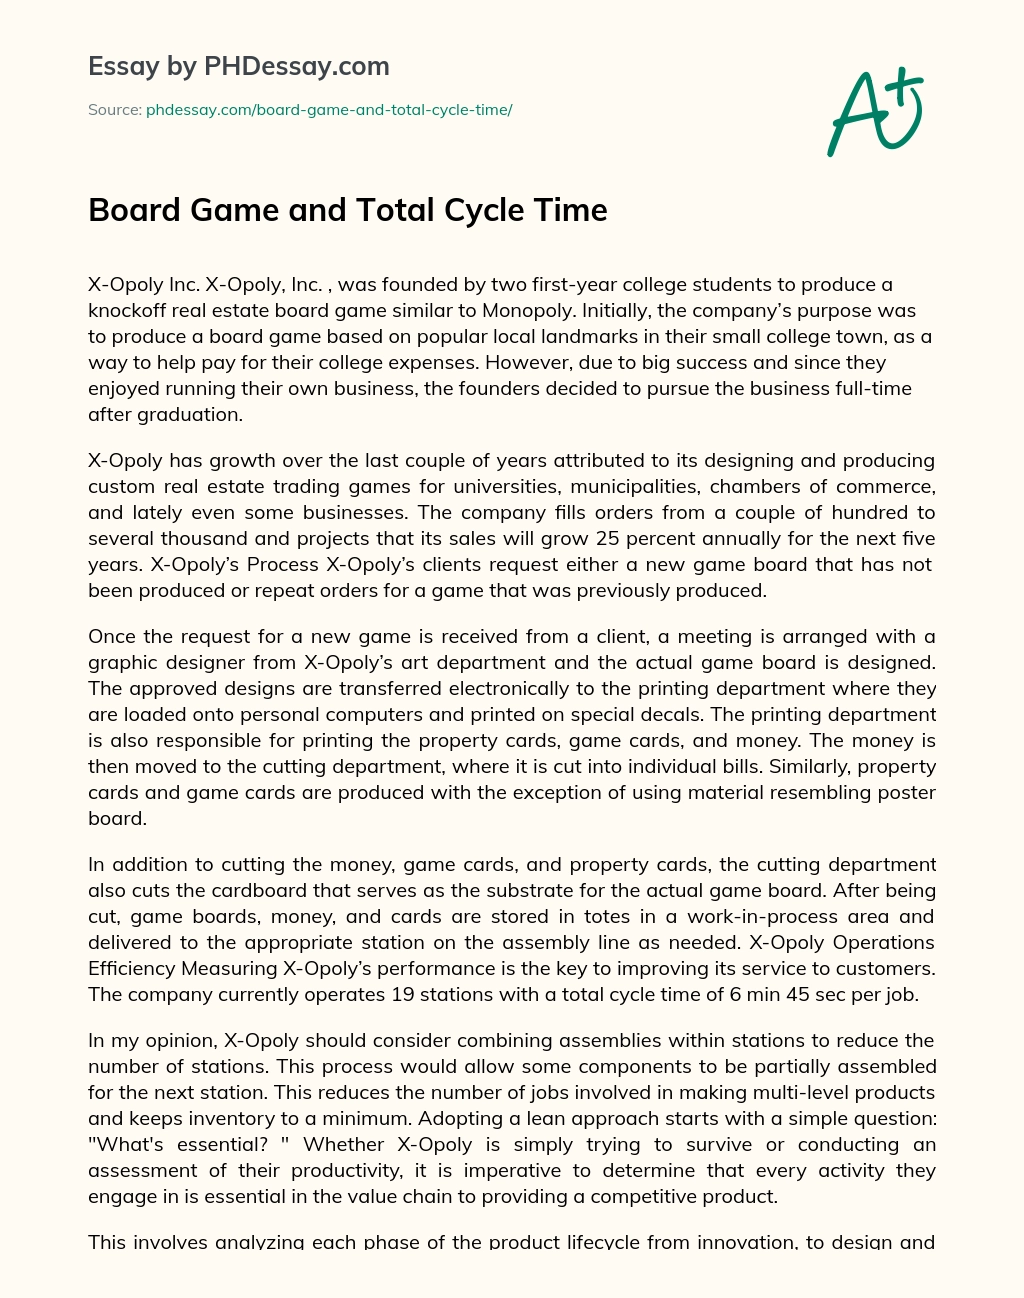 Board Game and Total Cycle Time essay